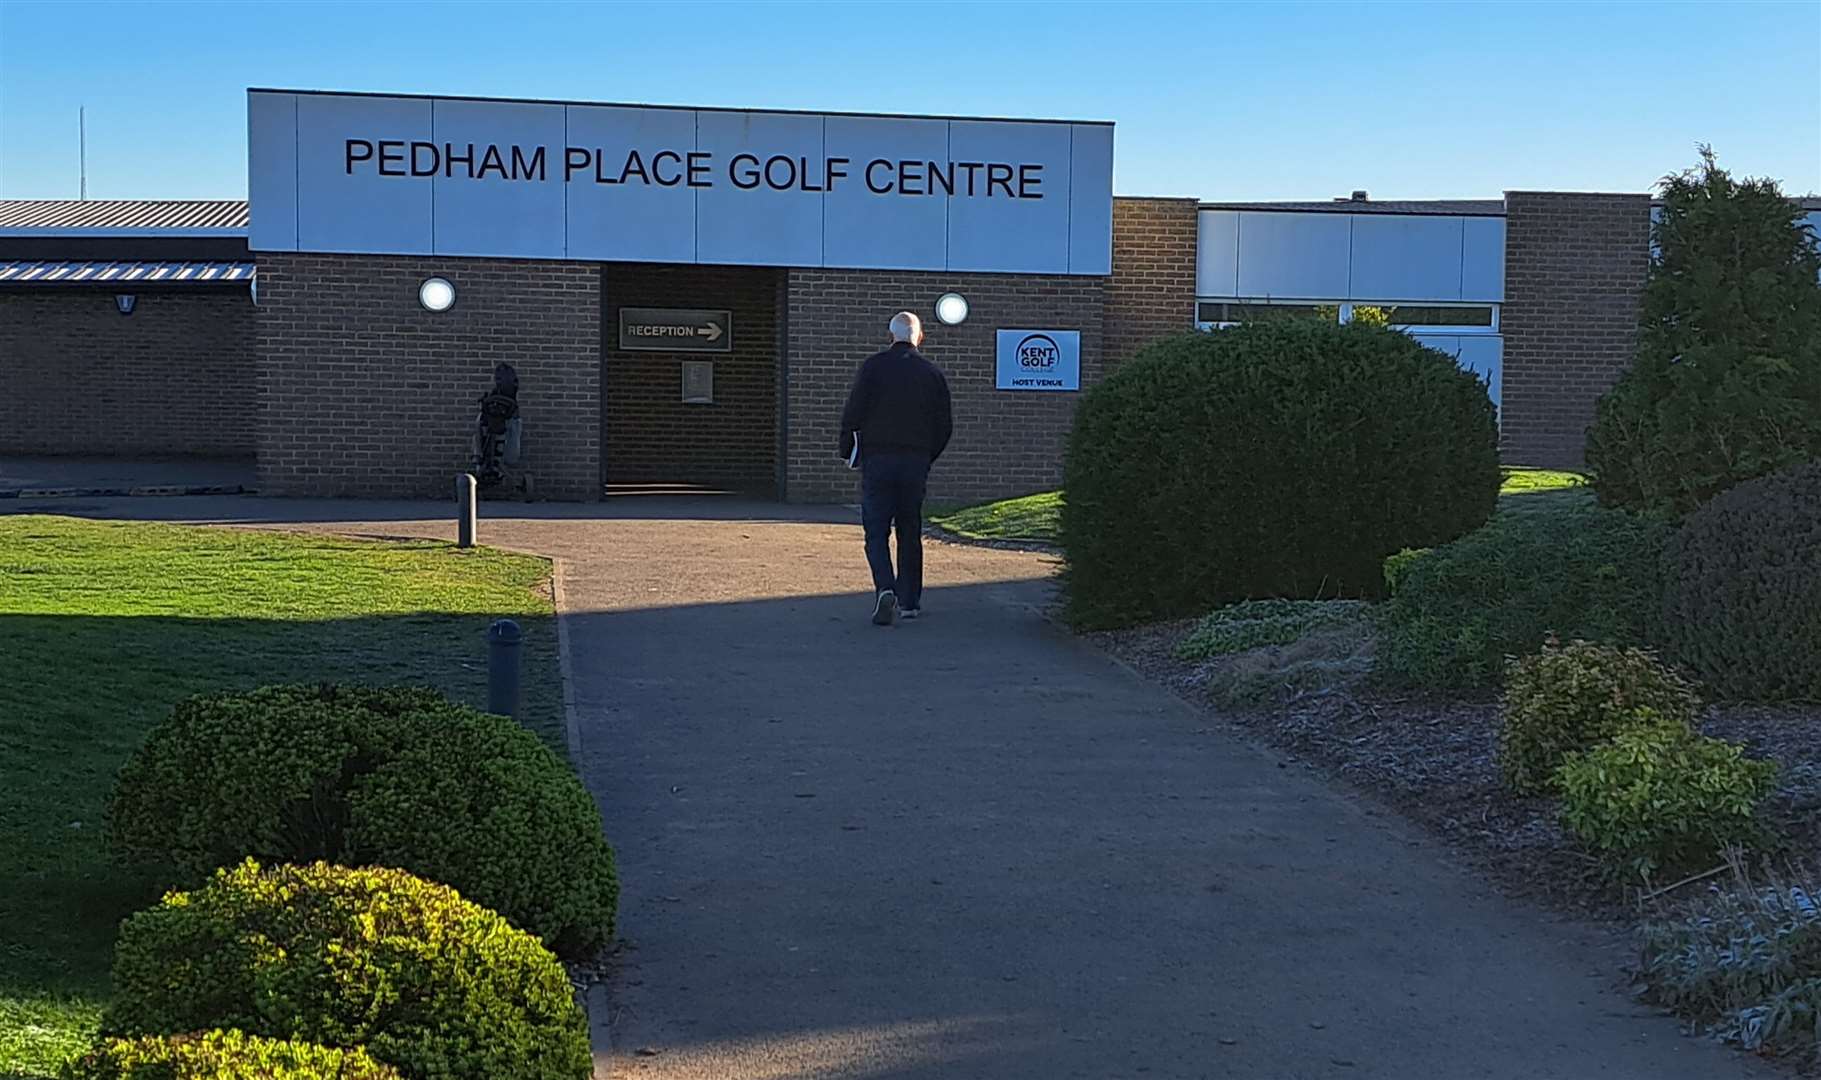 Pedham Place Golf Club is popular among local residents